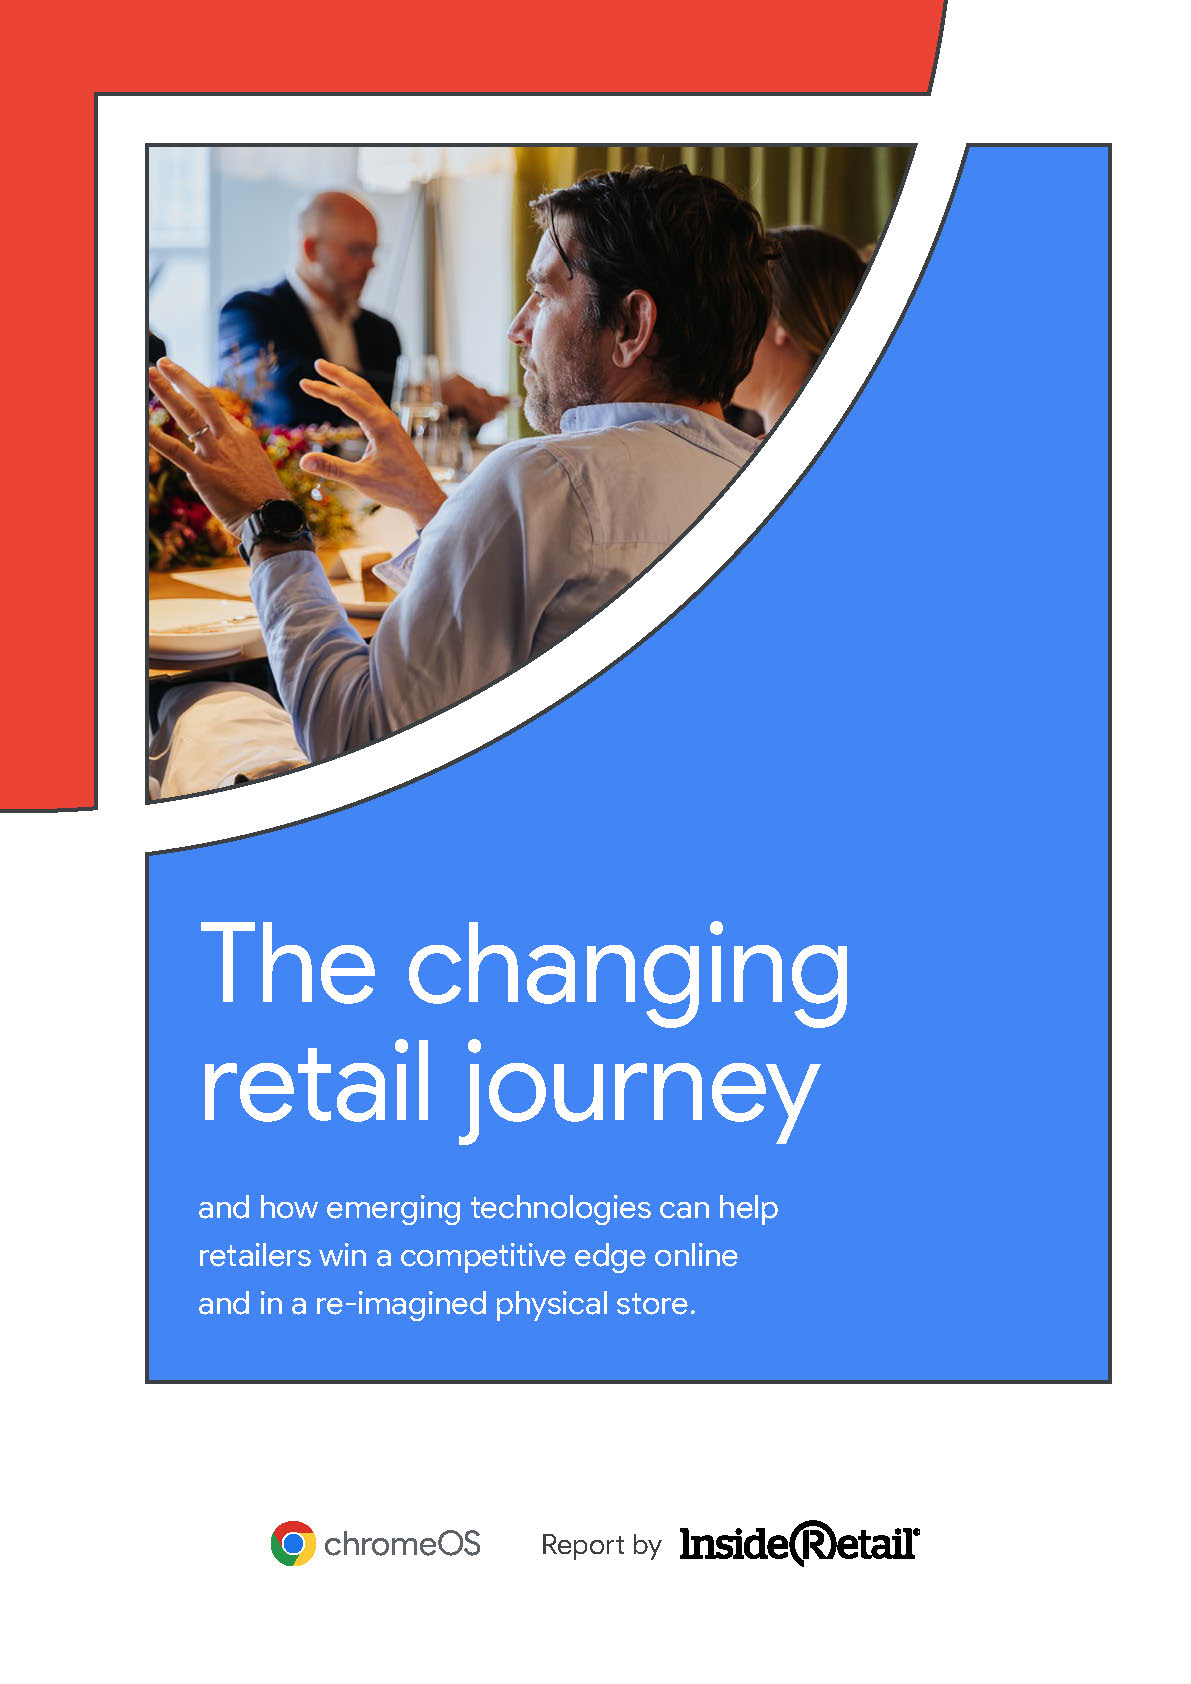 The changing retail journey